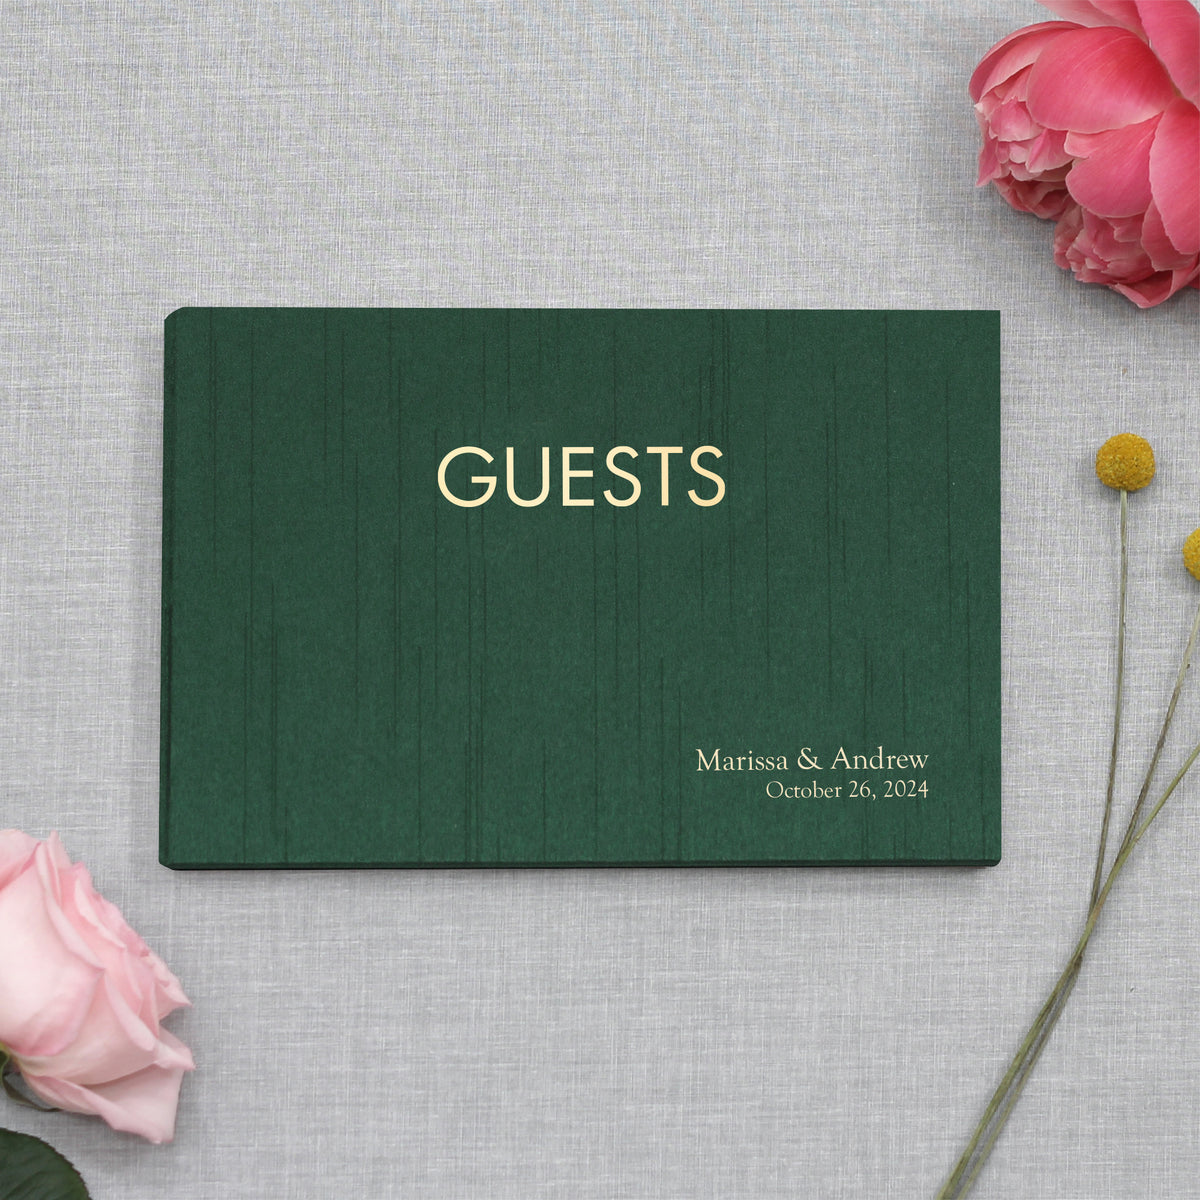 Classic Guestbook | Cover: Emerald Silk | Available Personalized